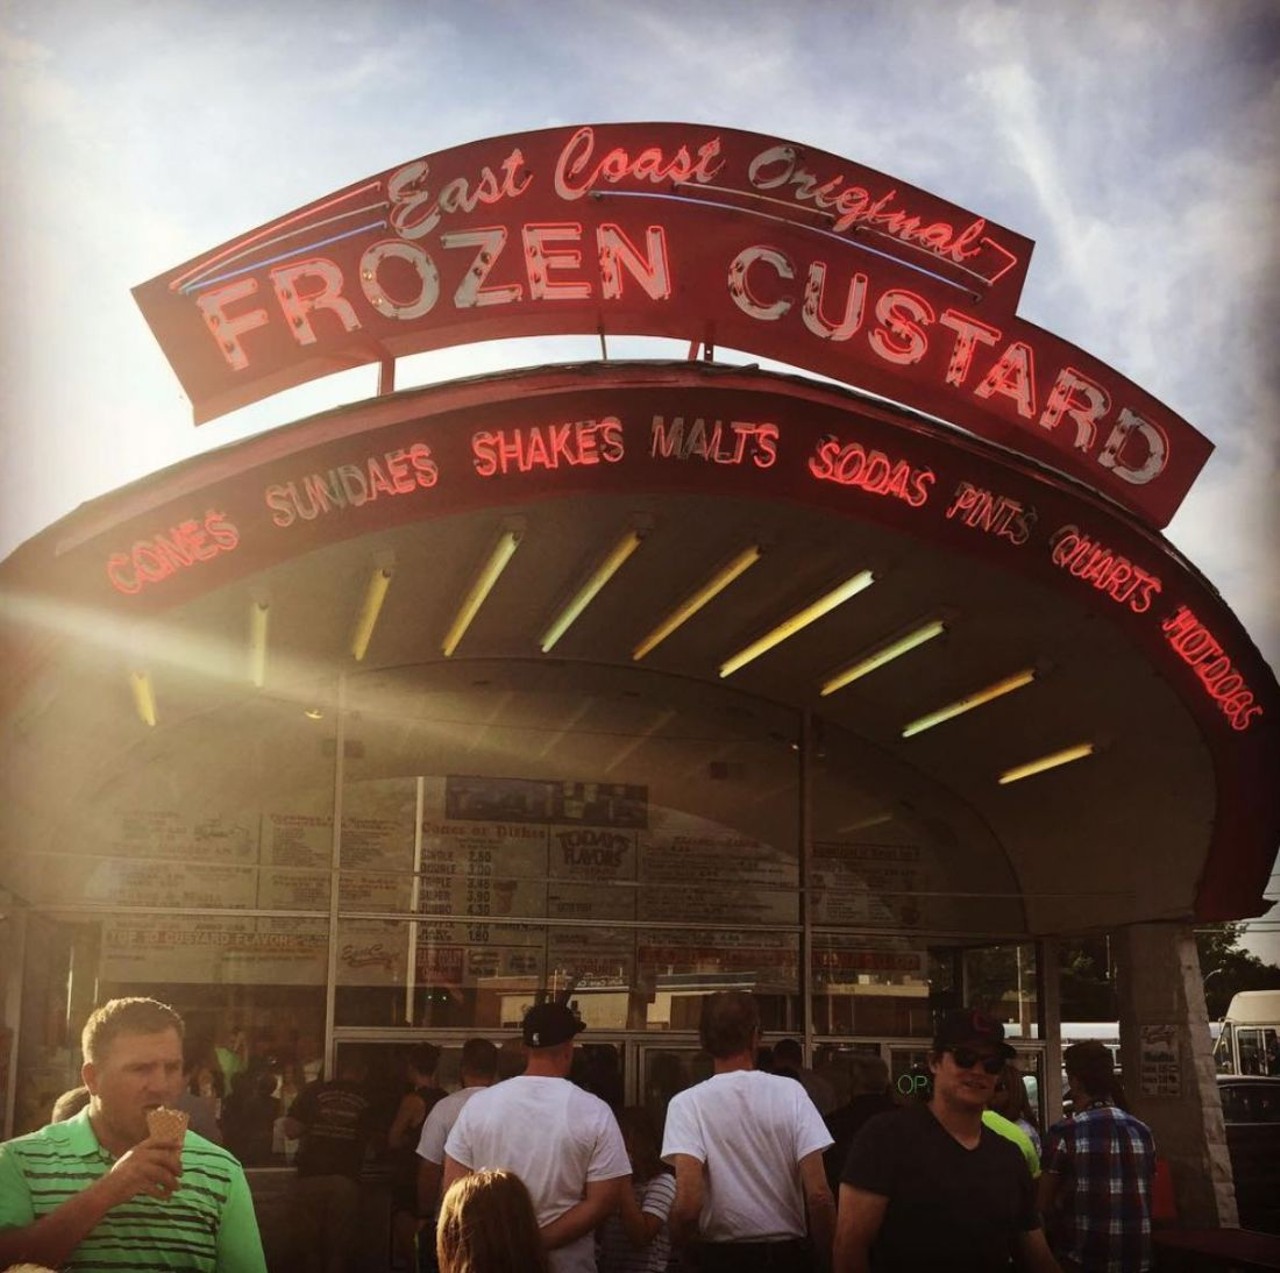  East Coast Custard
various locations
This custard shop has five locations in the Cleveland area, serving sweets to help customers cool off and recharge. 
Photo via lauren2zak/Instagram